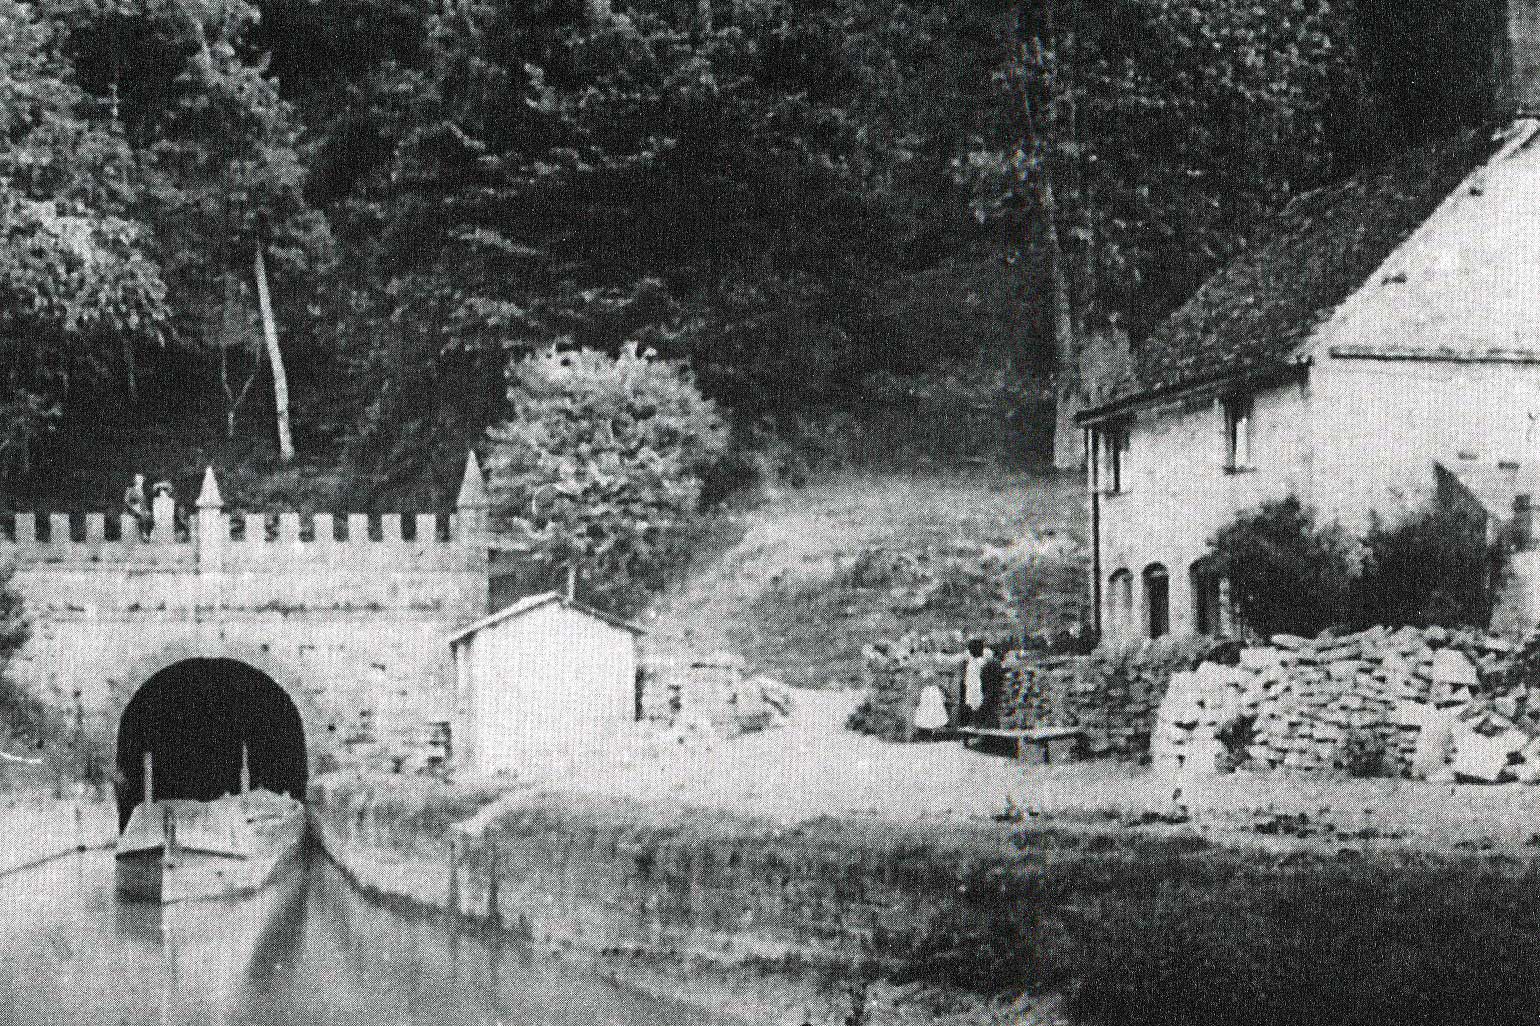 Daneway end of Sapperton Canal Tunnel c.1910. Note the low water level